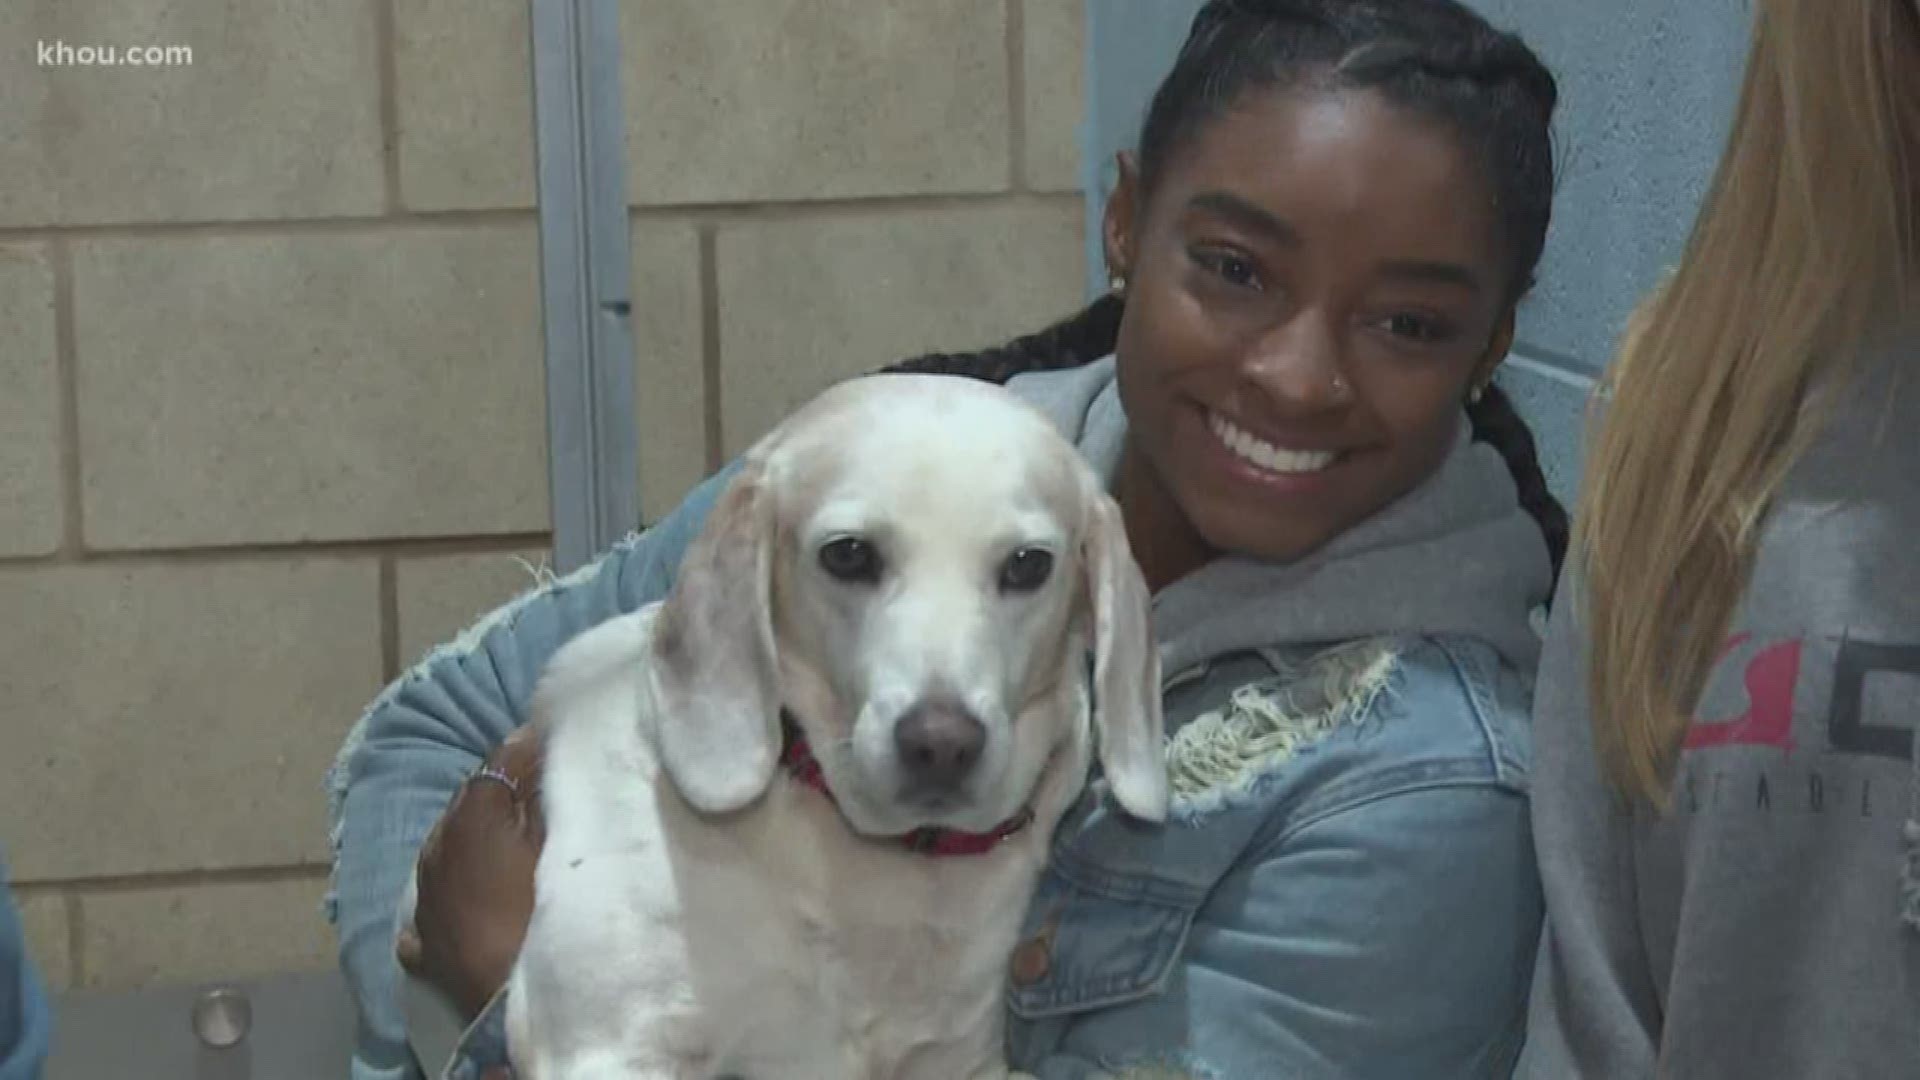 Houston's own Simone Biles spent an hour in a dog kennel to help raise money for abandoned animal rescue.